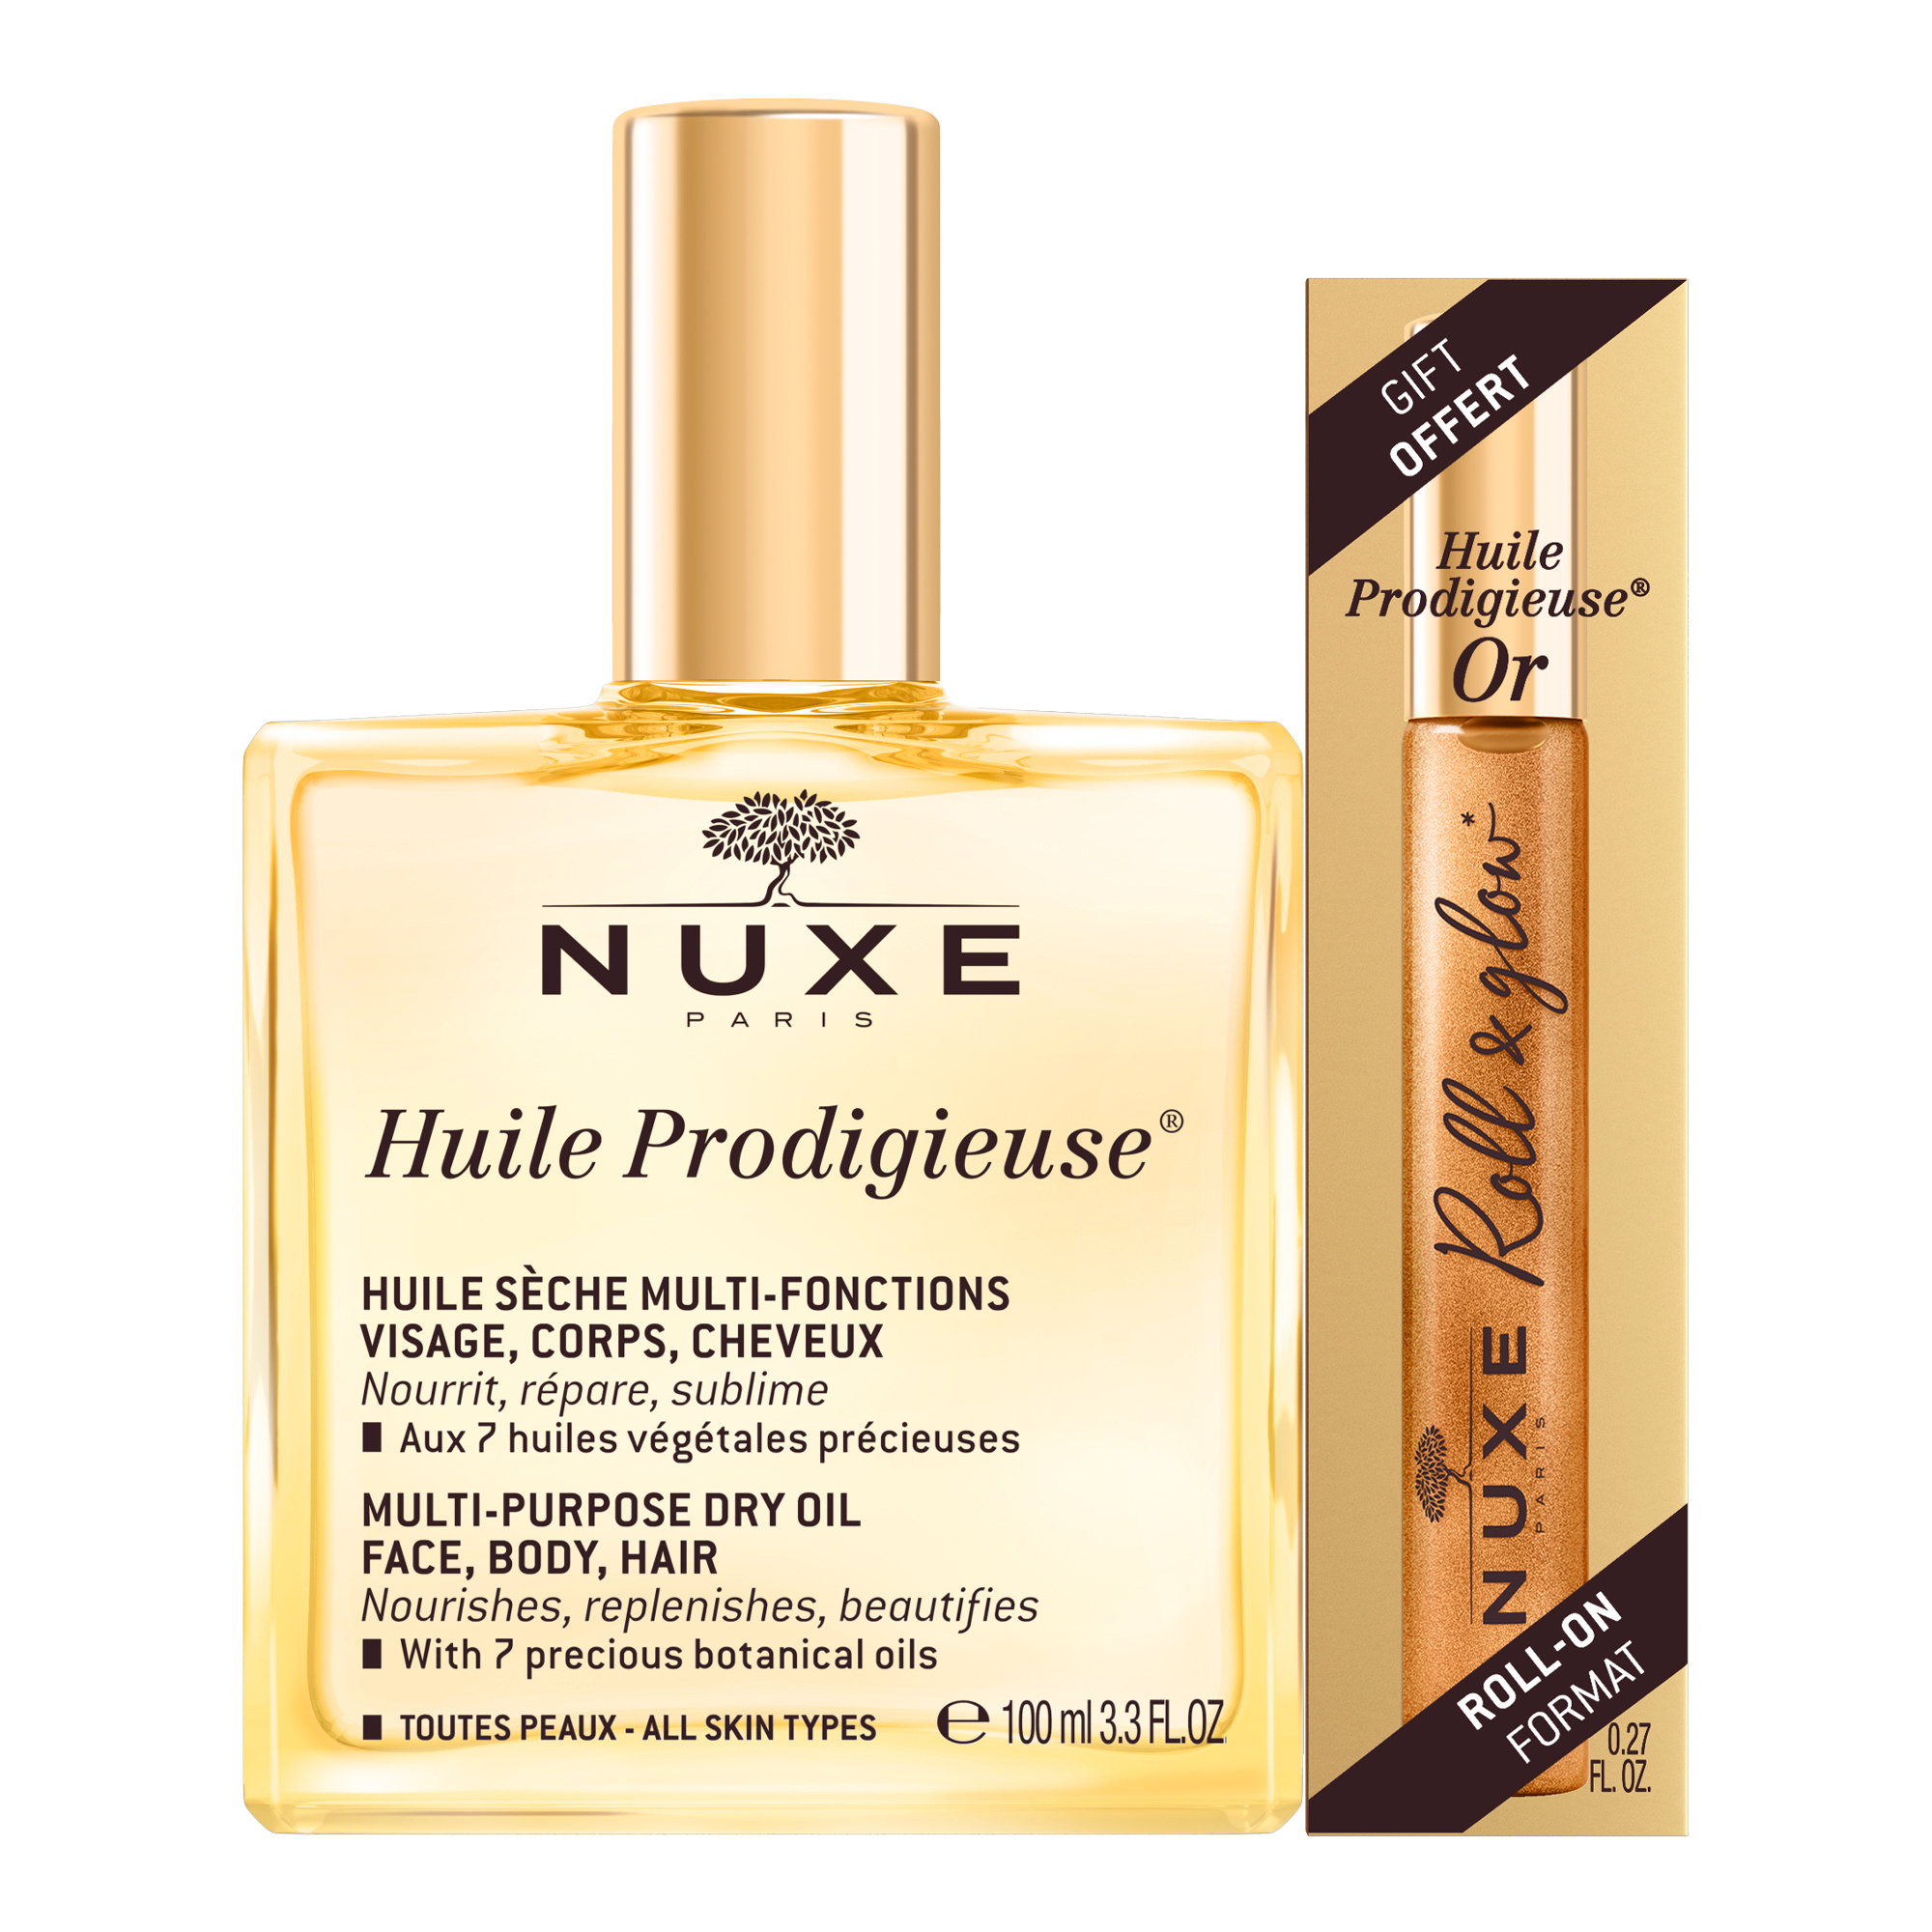 Nuxe - Huile Prodigiuse Dry Oil + Roll On or